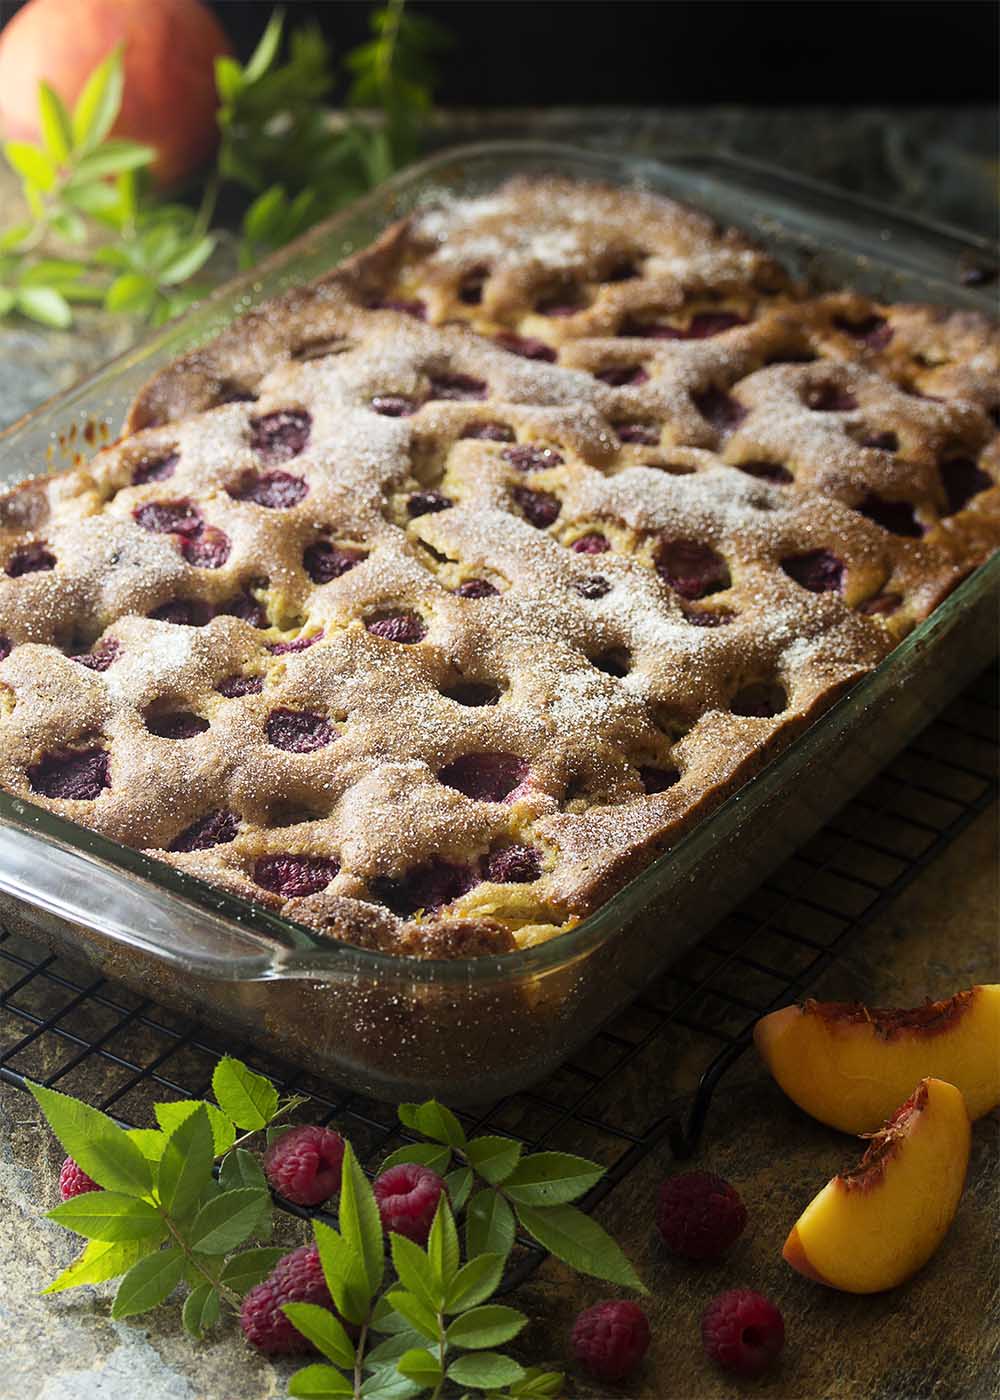 This easy fresh peach cake studded with raspberries is full of fruit flavor, needs no mixer, and freezes beautifully! A simple cinnamon sugar topping finishes it off. Great for breakfast or for dessert. | justalittlebitofbacon.com